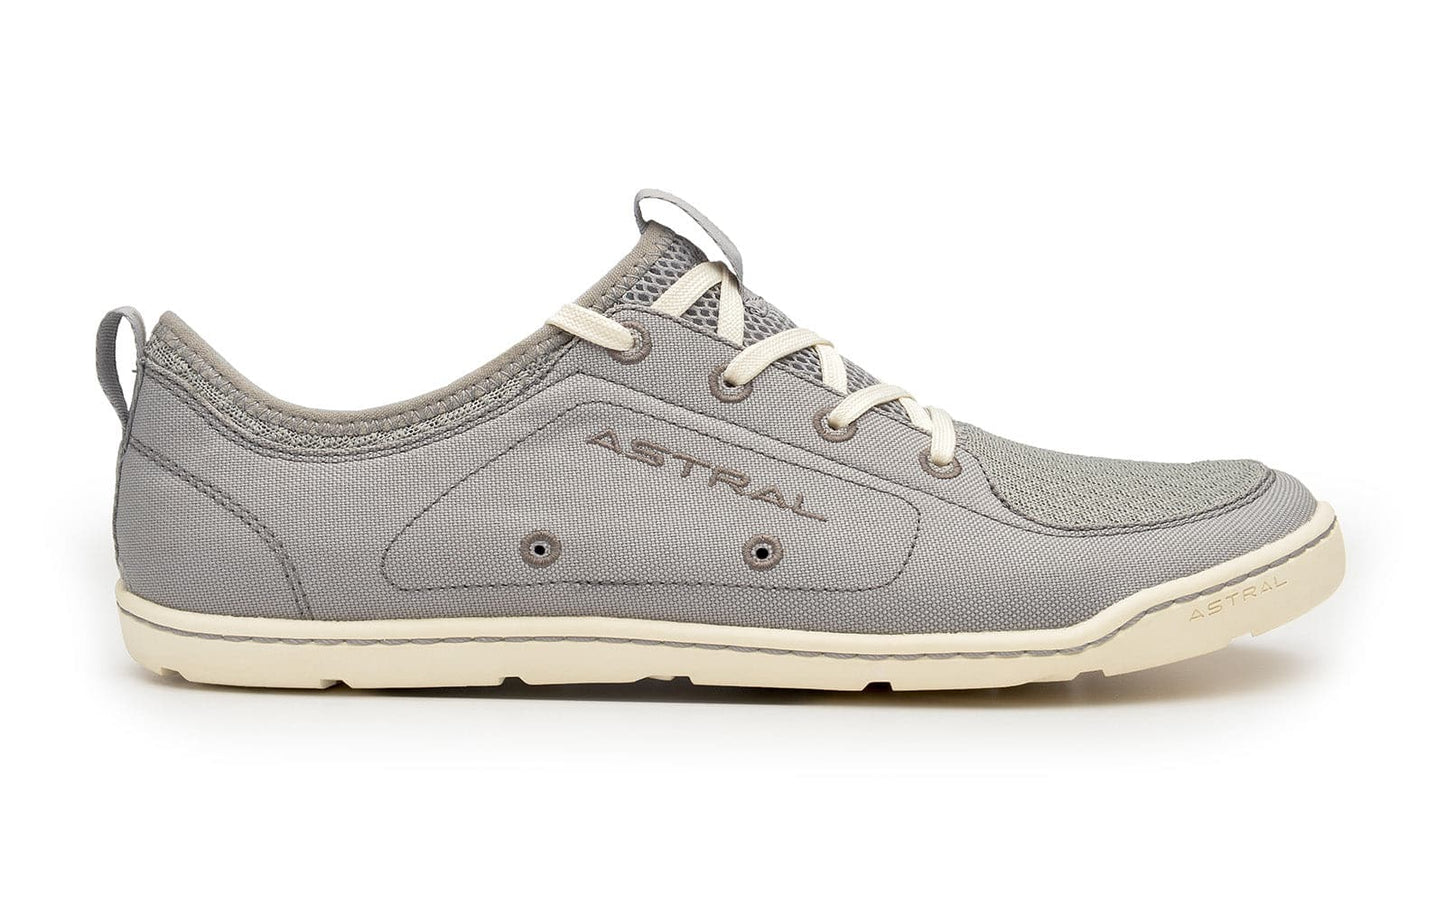 Featuring the Loyak - Men's men's footwear manufactured by Astral shown here from a seventh angle.